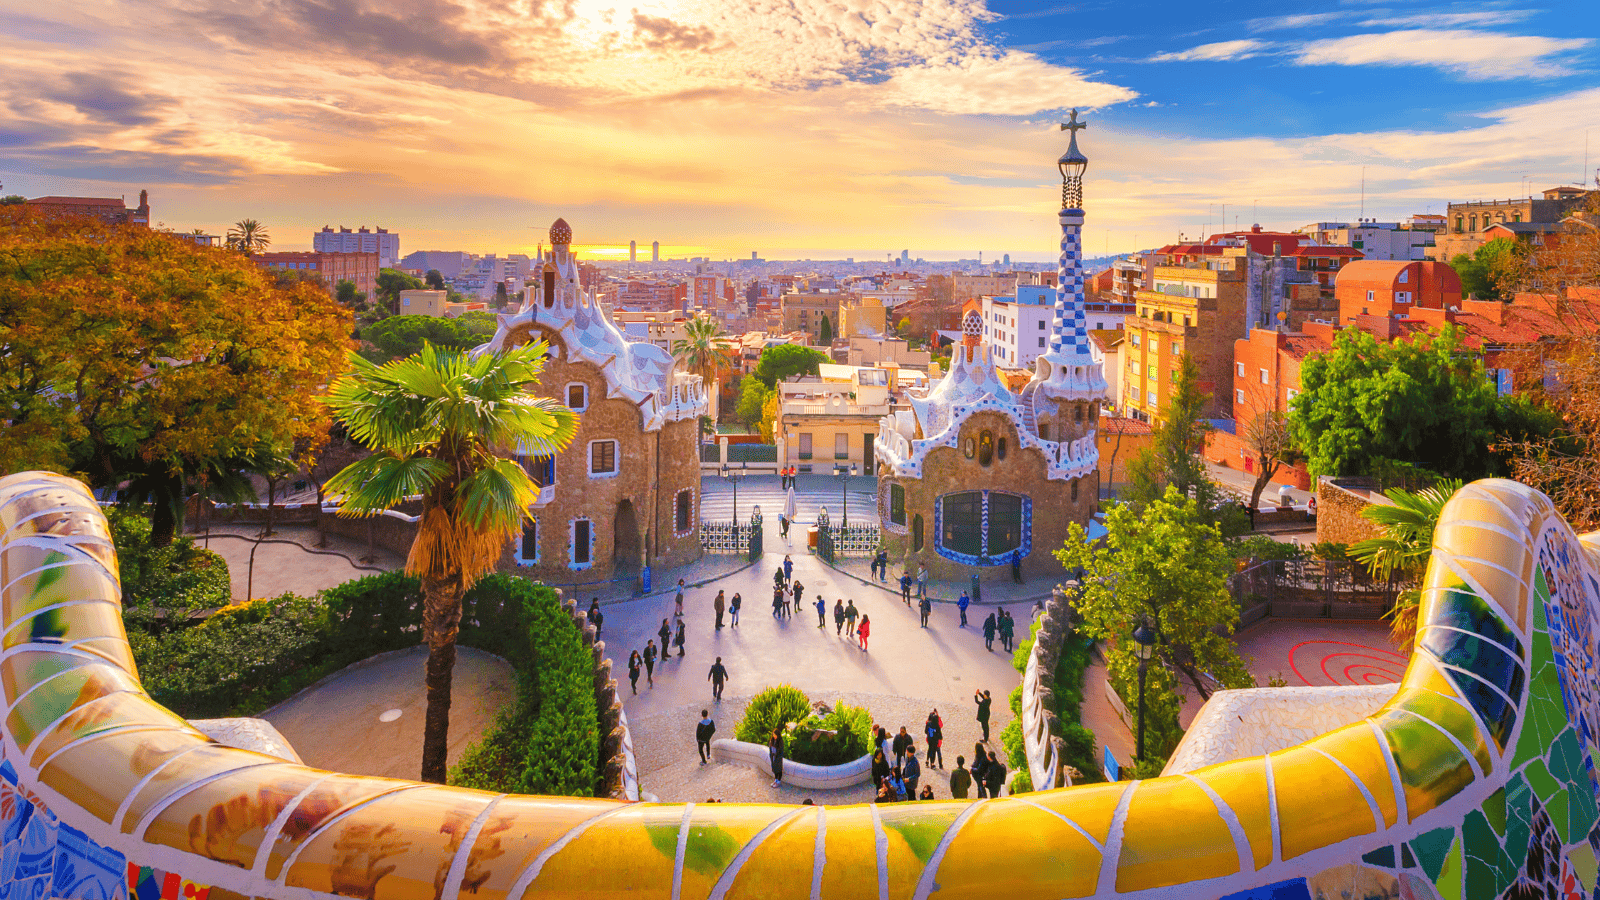 <p>When you book through <a href="https://www.iberia.com/us/en/stopover-in-madrid/" rel="nofollow external noopener noreferrer">Iberia</a>, you can spend up to nine days exploring <a href="https://whatthefab.com/madrid-travel-guide.html" rel="follow">Madrid</a>. It’s one of the best cities to immerse yourself in Spain’s distinct cultural heritage.</p><p>From indulgent cuisine to world-class art and lively nightlife, there’s no shortage of ways to pass the time. Iberia also gives you access to exclusive discounts and promotions to enhance your stopover experience.</p>